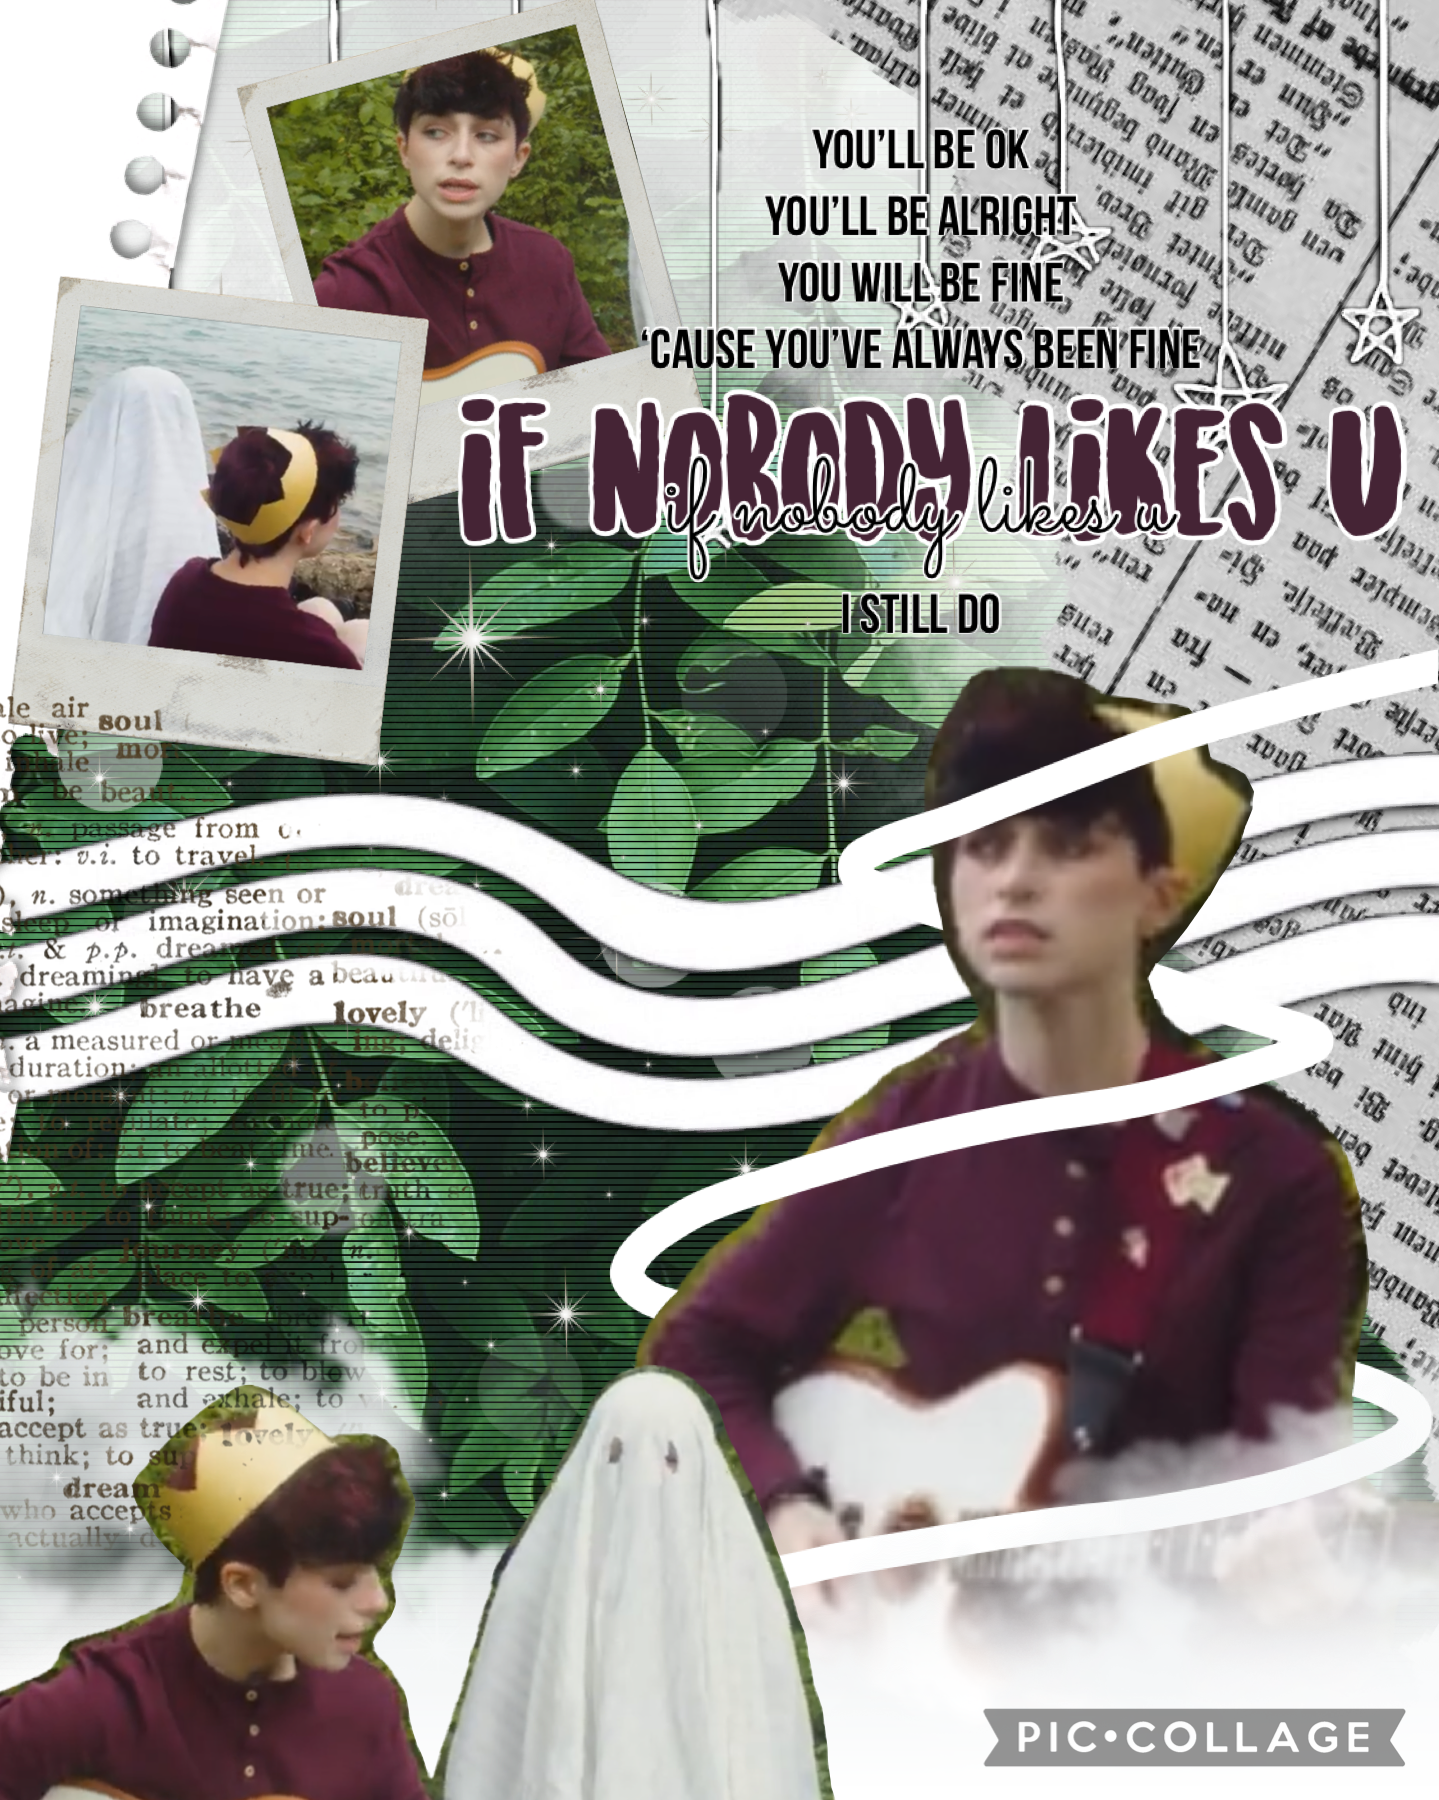 💚 TAP 💚
💚 addison grace collage! 💚
💚 lyrics from the song ‘if nobody likes u’ 💚
💚 i recently got into addison grace and now have a crush on him lol 💚
💚 ily!! 💚